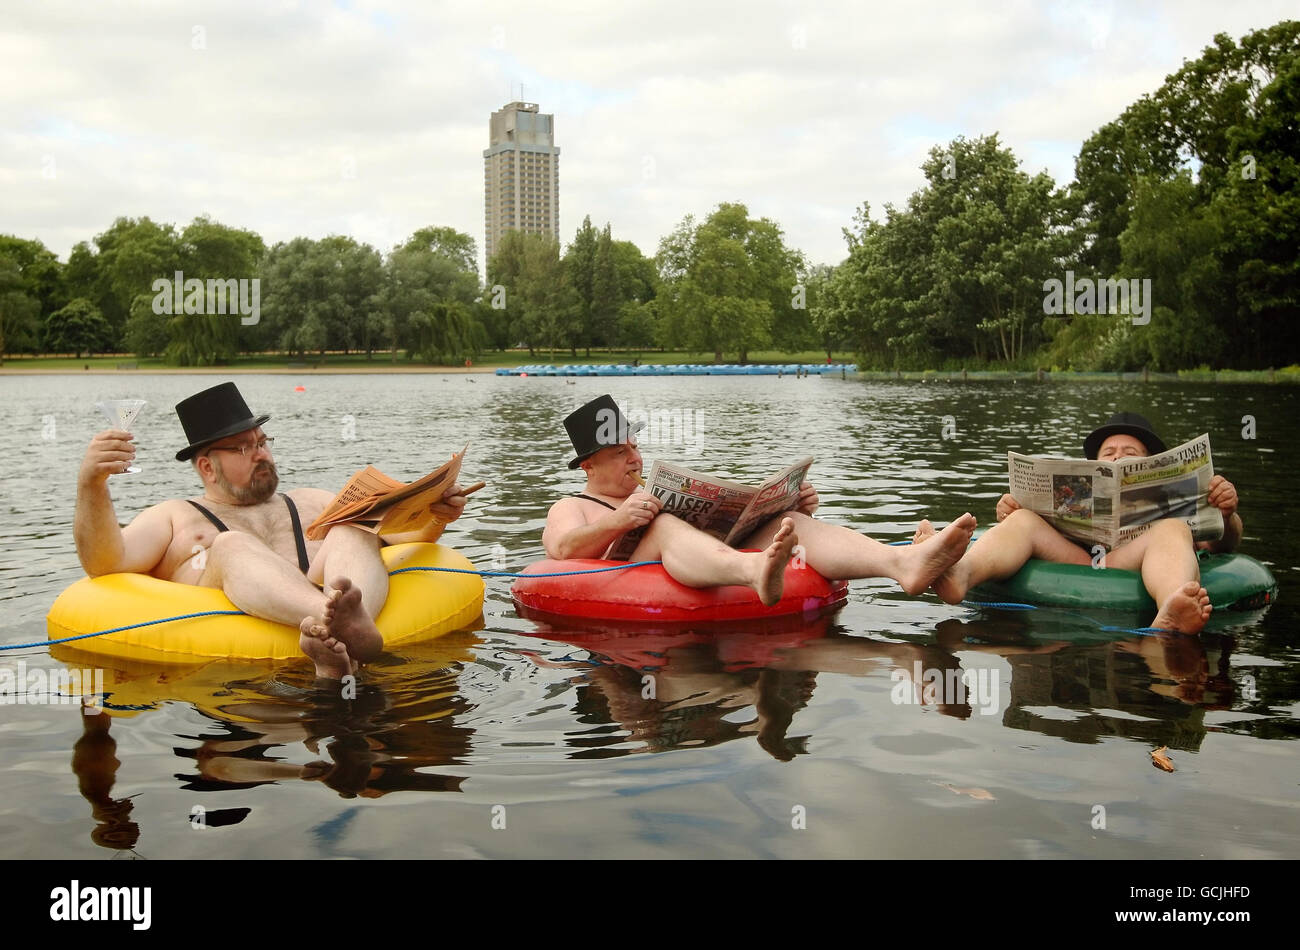 Businessmen dressed in mankinis float on rubber rings on the Serpentine in Hyde Park, central London, during a photocall for new 'community led' mobile phone company giffgaff. Stock Photo